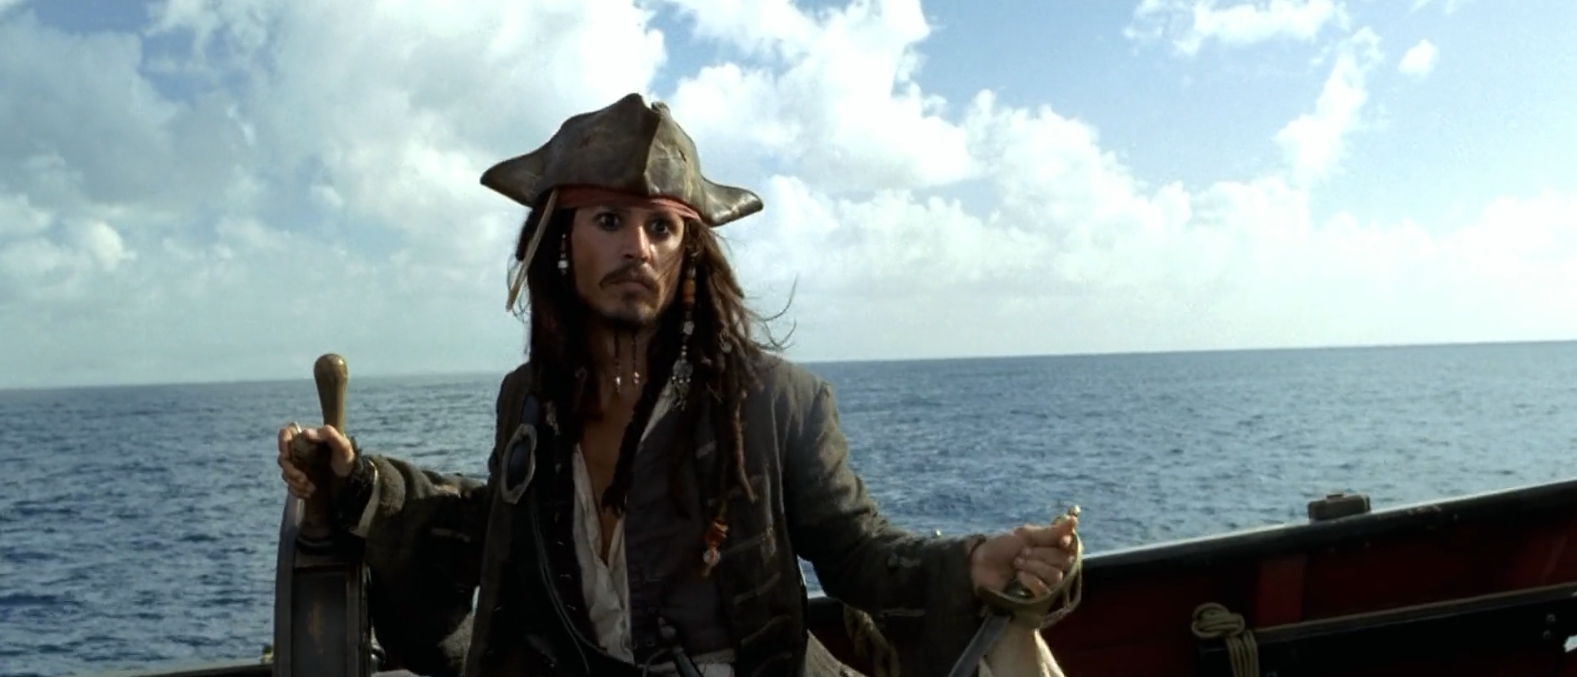 Pirates of the Caribbean: The Curse of the Black Pearl Movie Review